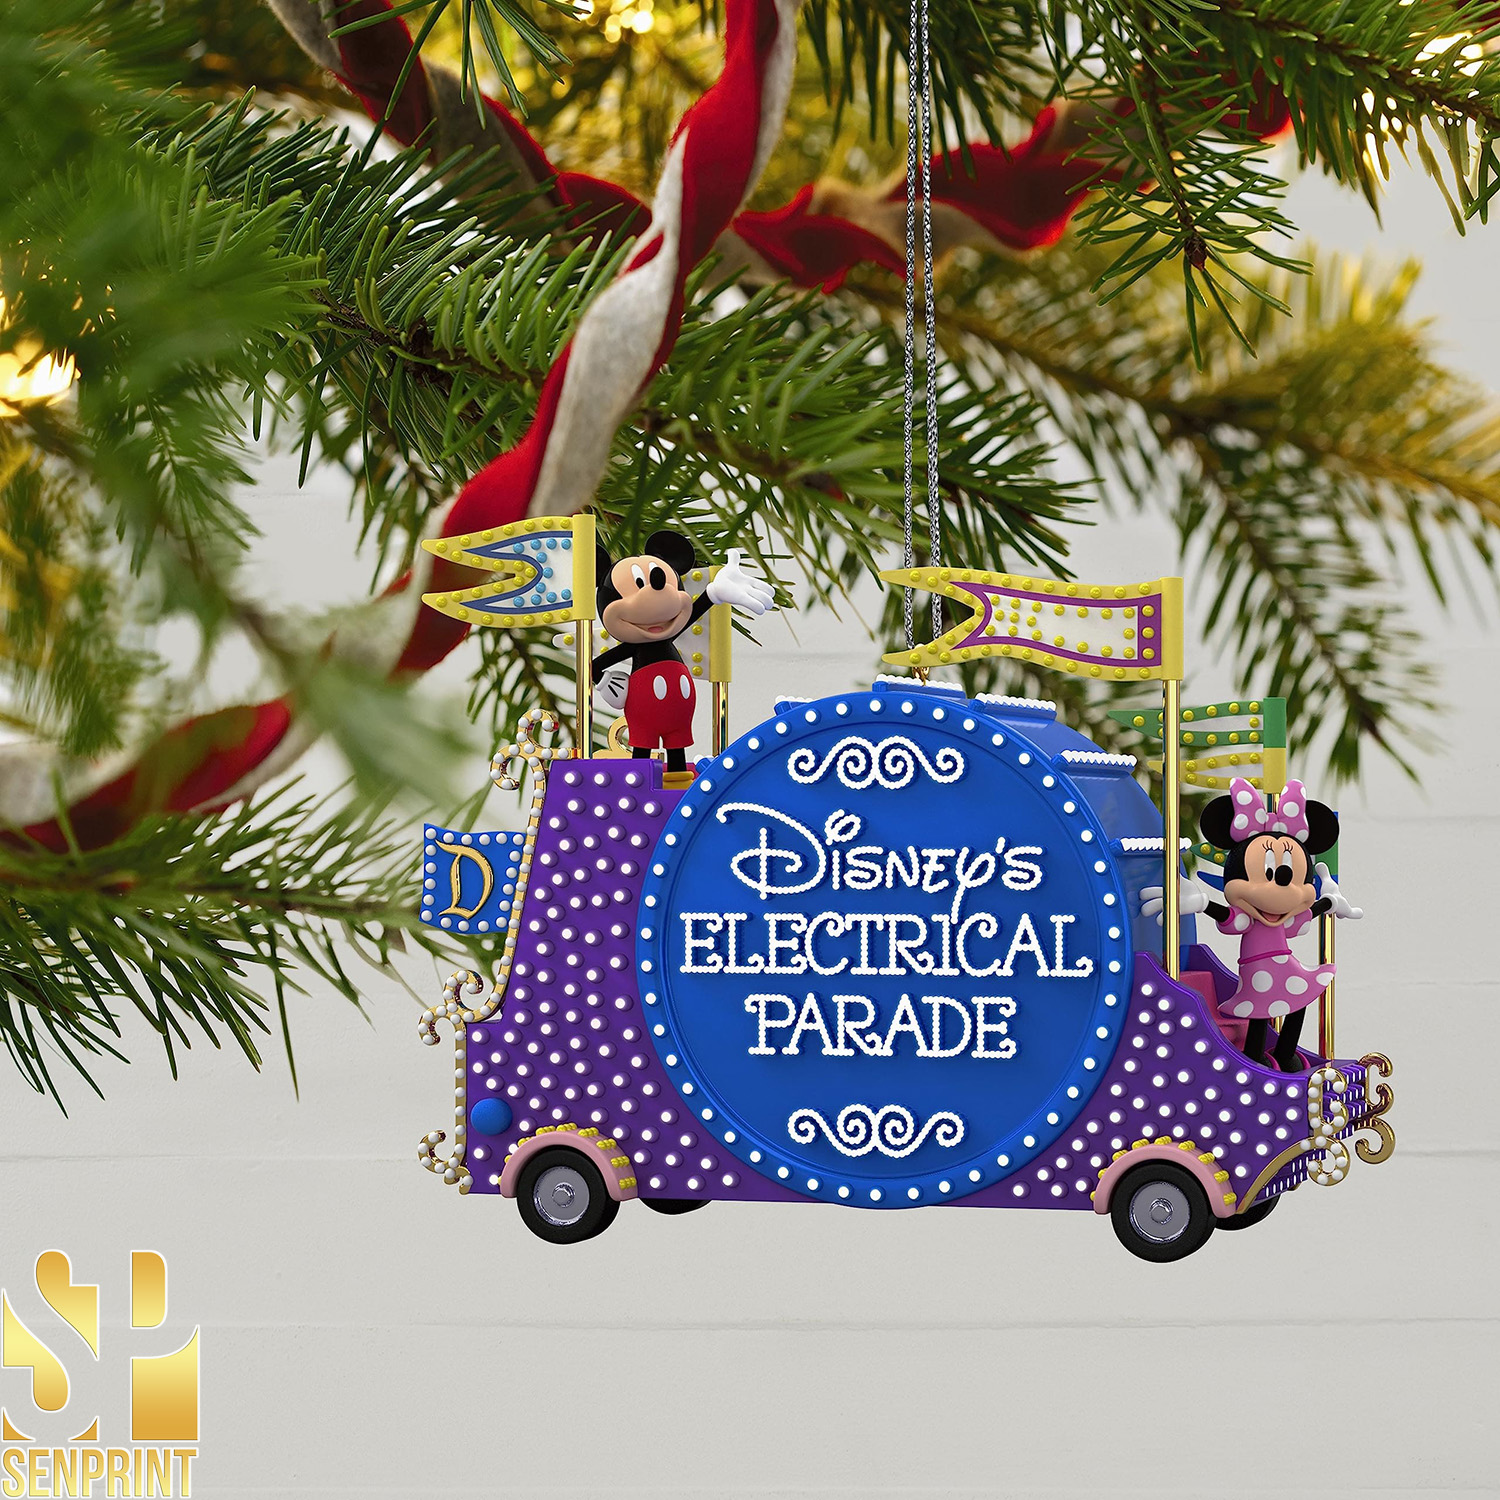 Dazzle Your Holidays with Disney's Electrical Parade Ornament Collection